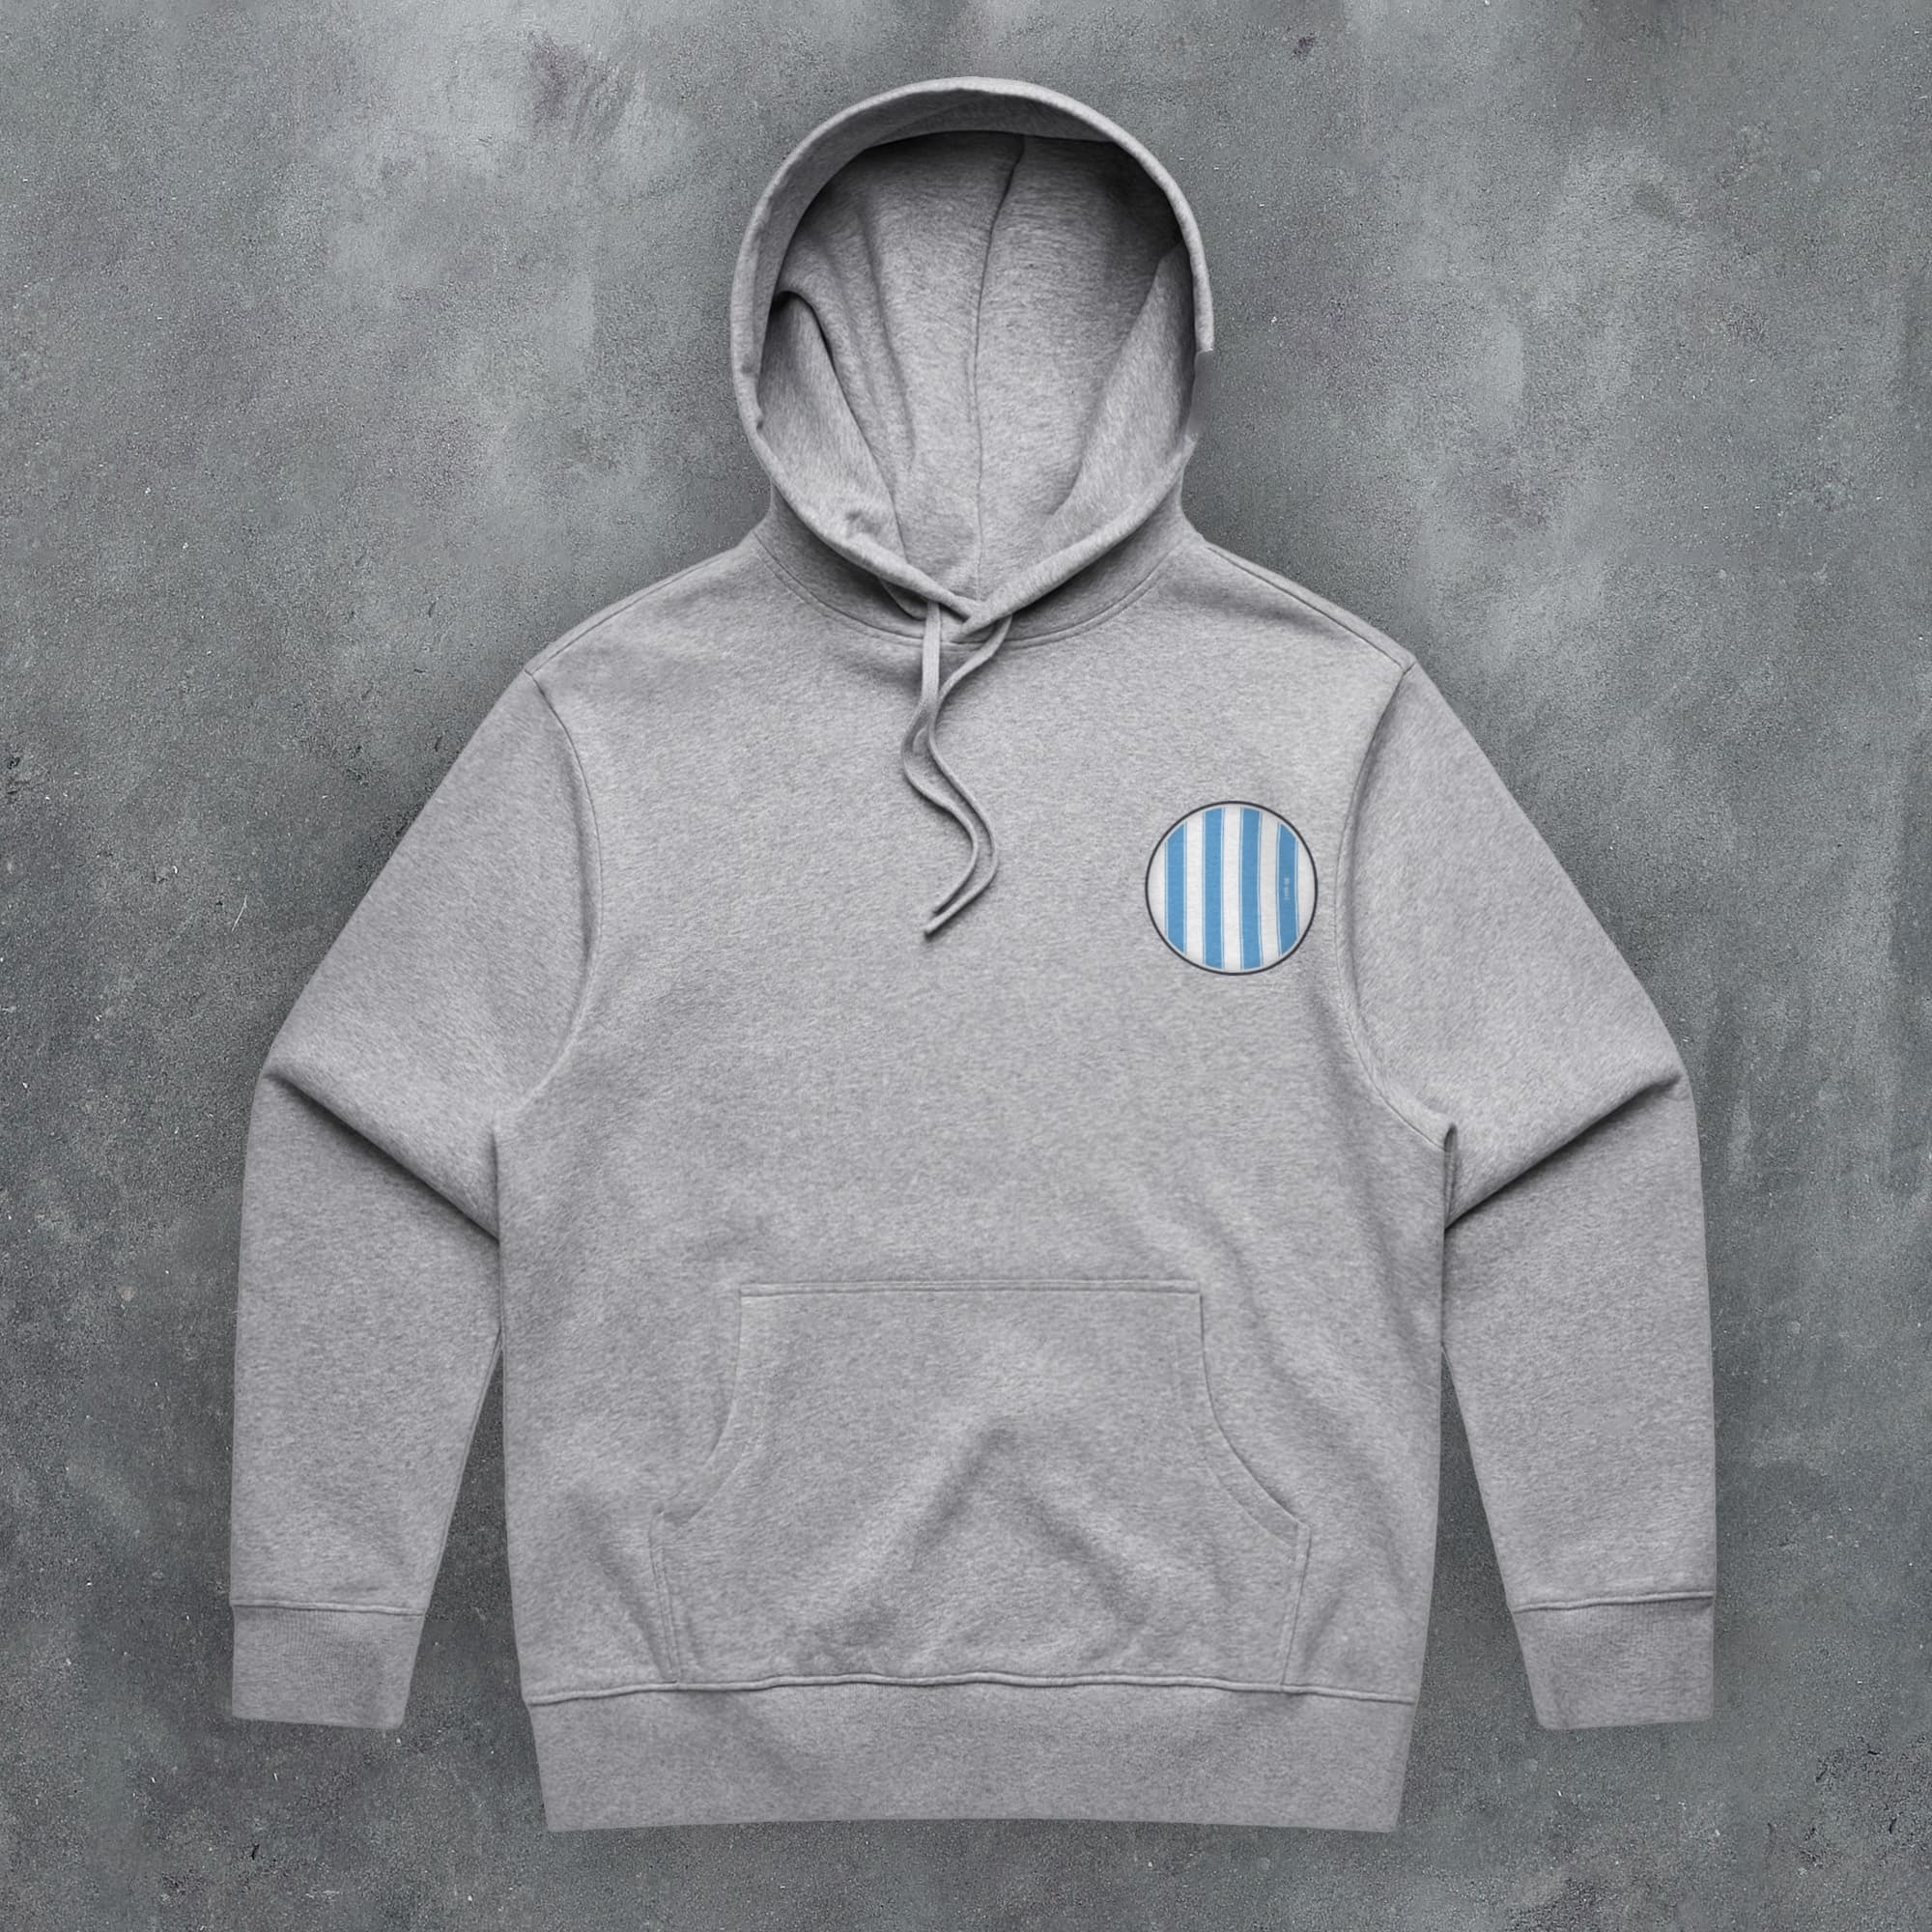 a grey hoodie with a blue and white striped patch on it